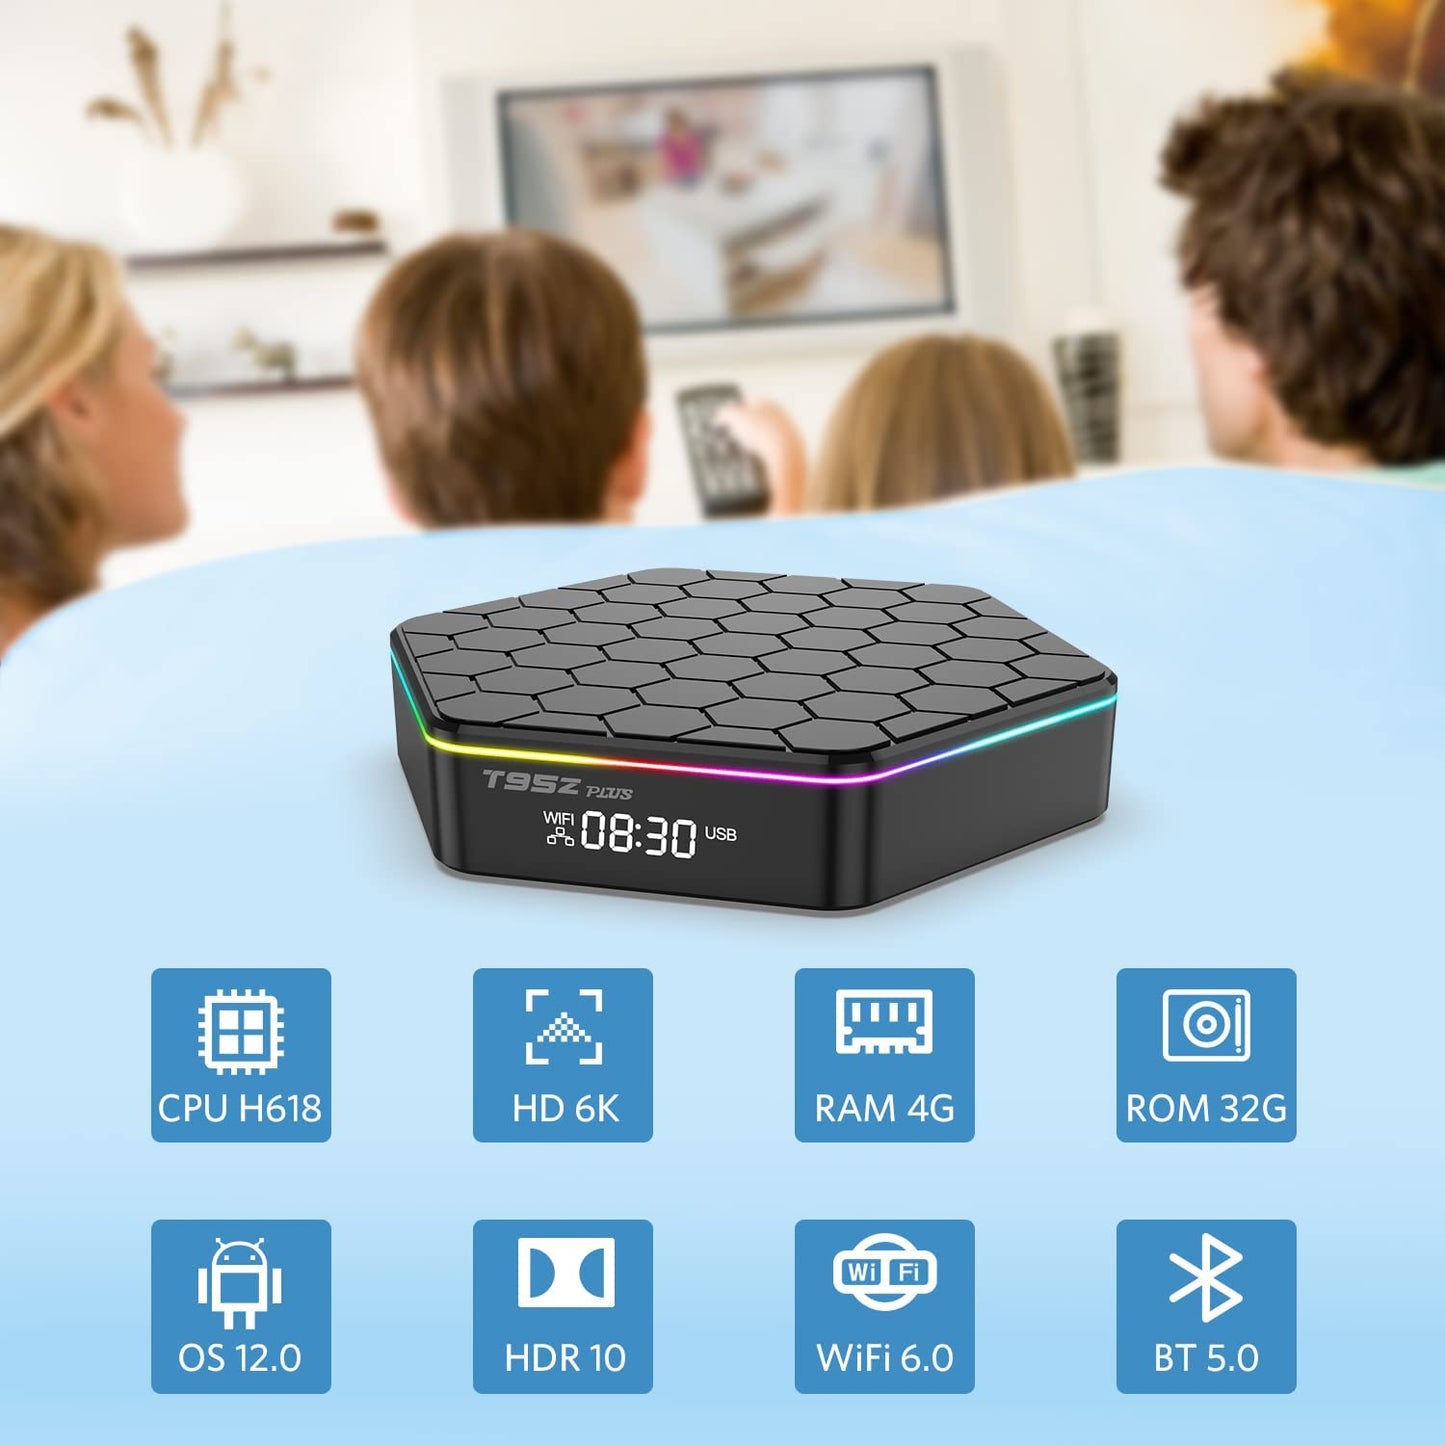 Android 12.0 TV Box T95zplus ，6k/3D HD Tv Box H618 Quadcore 4GB RAM 32GB ROM 2.4G/5.0G Dual WiFi & BT 5.0 Android Box Support Multi-Lingual TV Box with LAN Ethernet 10/100M for Chat Movie Game etc.